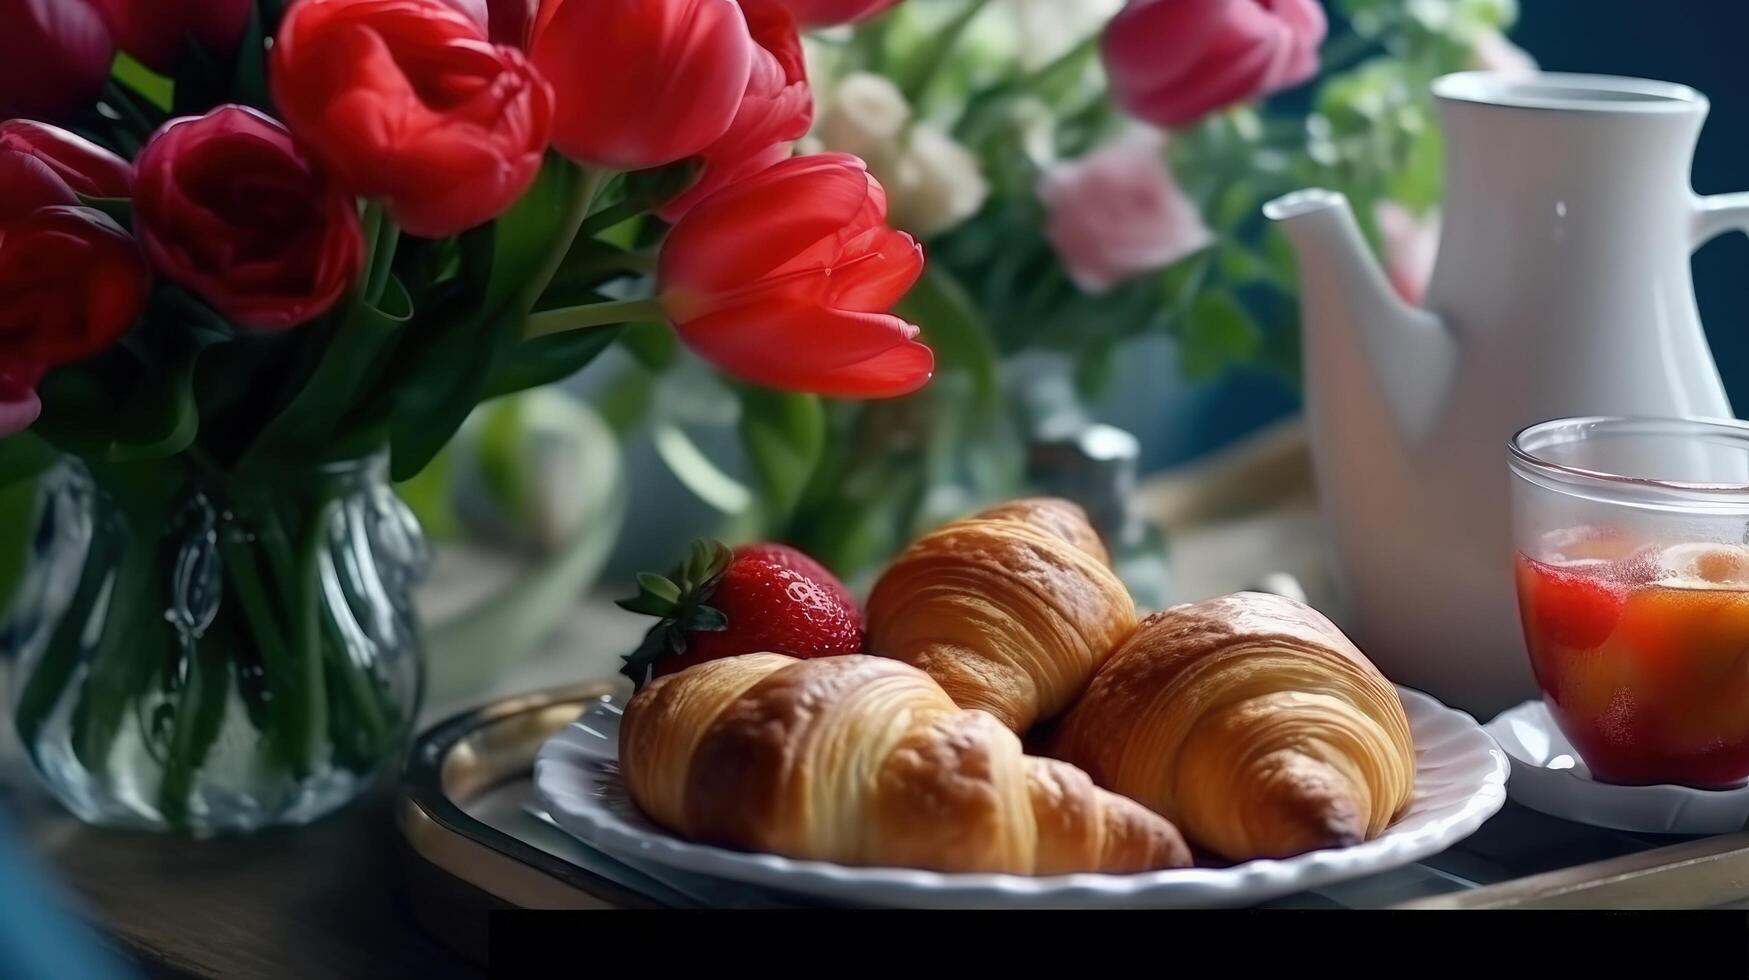 Beautiful breakfast, lunch with cup of coffee and fresh croissants, tulips Illustration photo